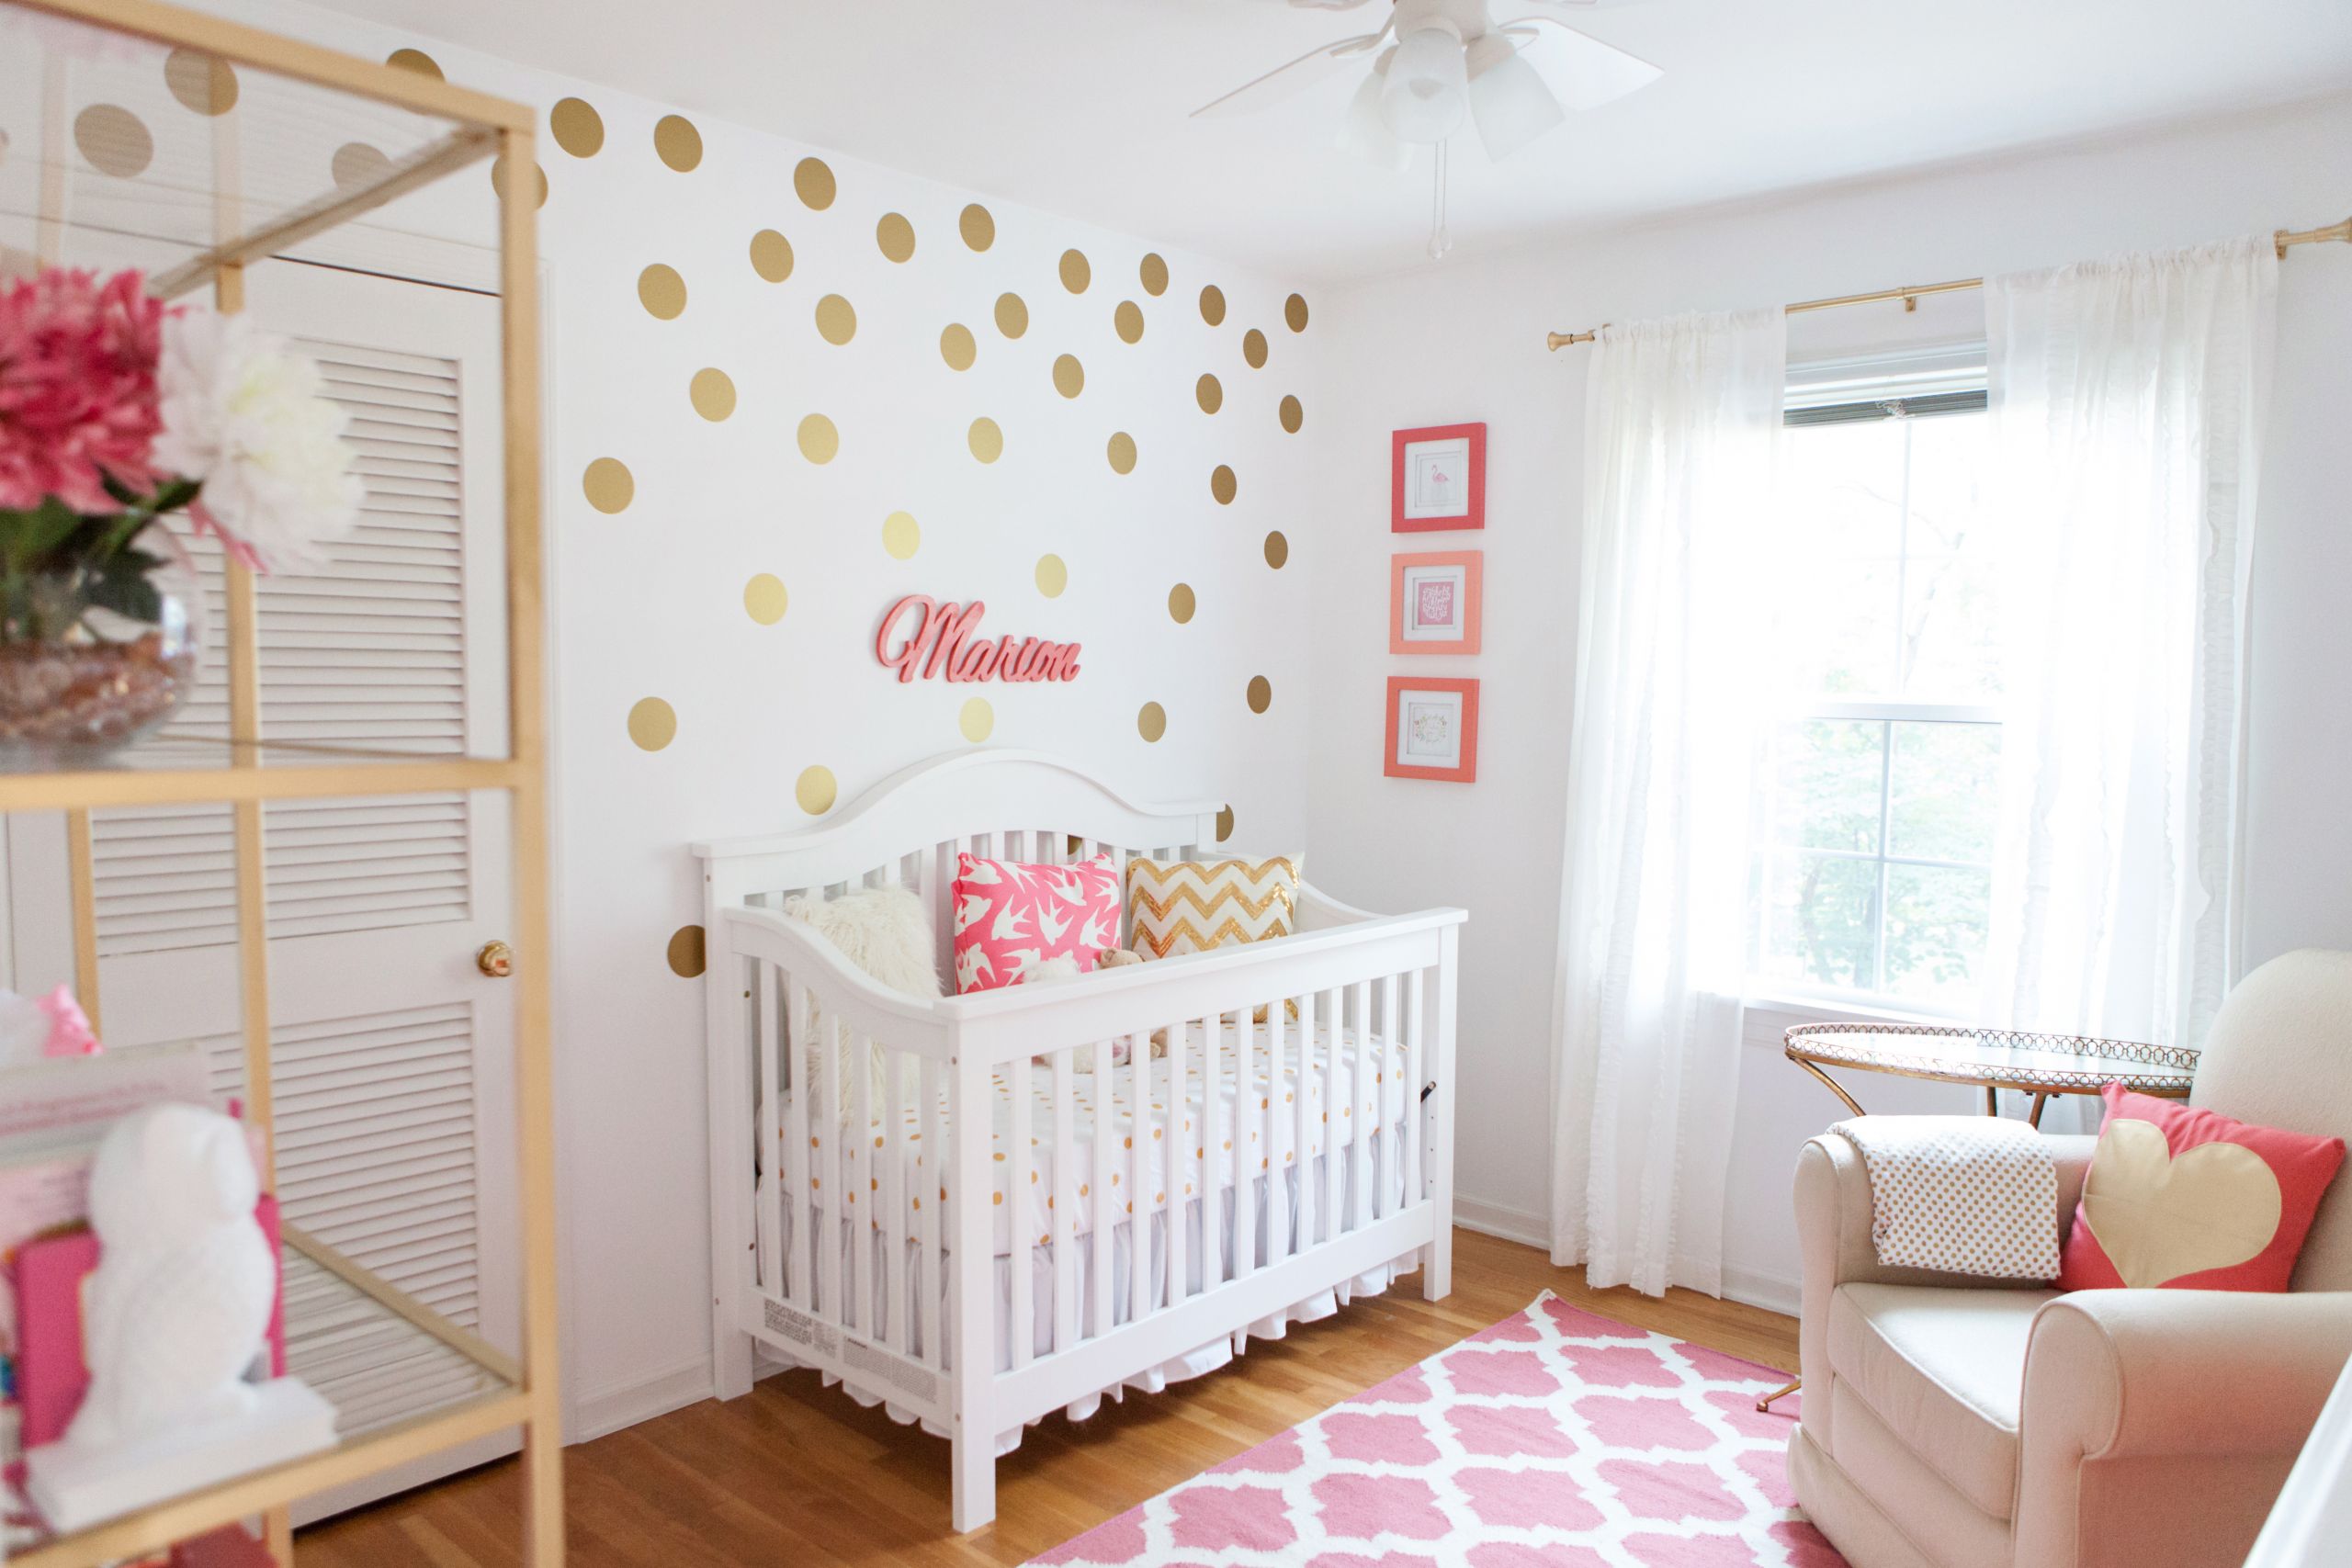 Baby Bedroom Decorations
 Marion s Coral and Gold Polka Dot Nursery Project Nursery